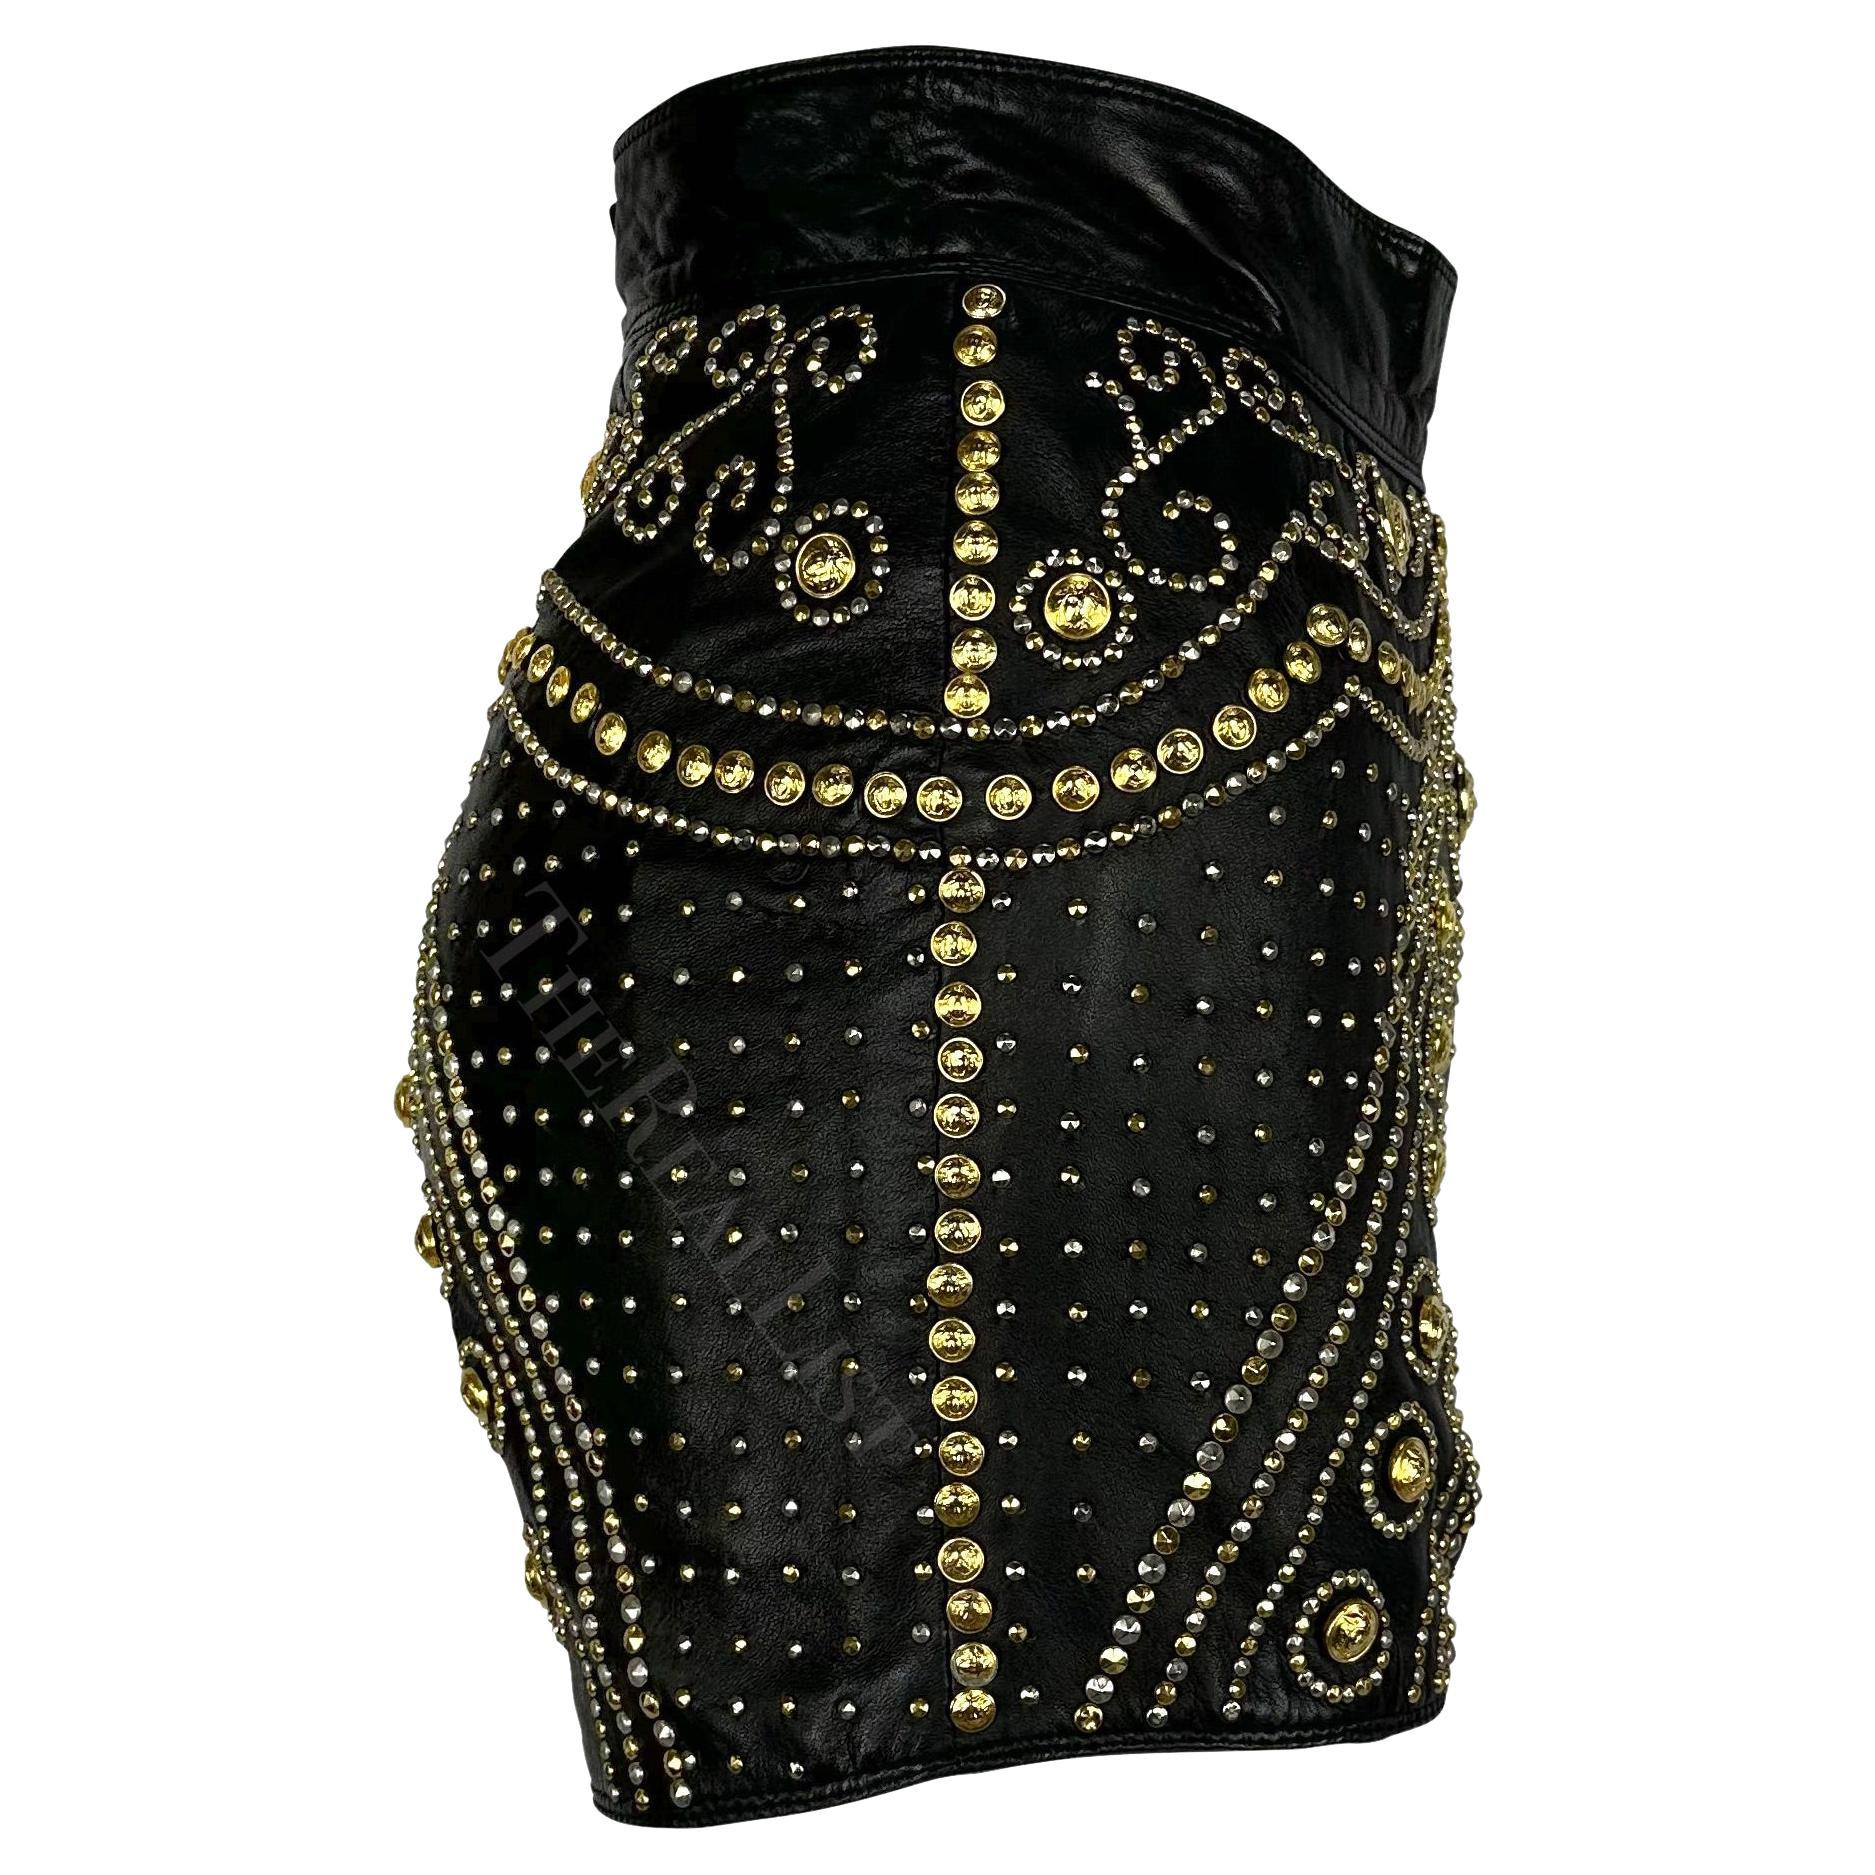 F/W 1992 Atelier Versace Haute Couture Runway Medusa Studded Leather Shorts For Sale 5